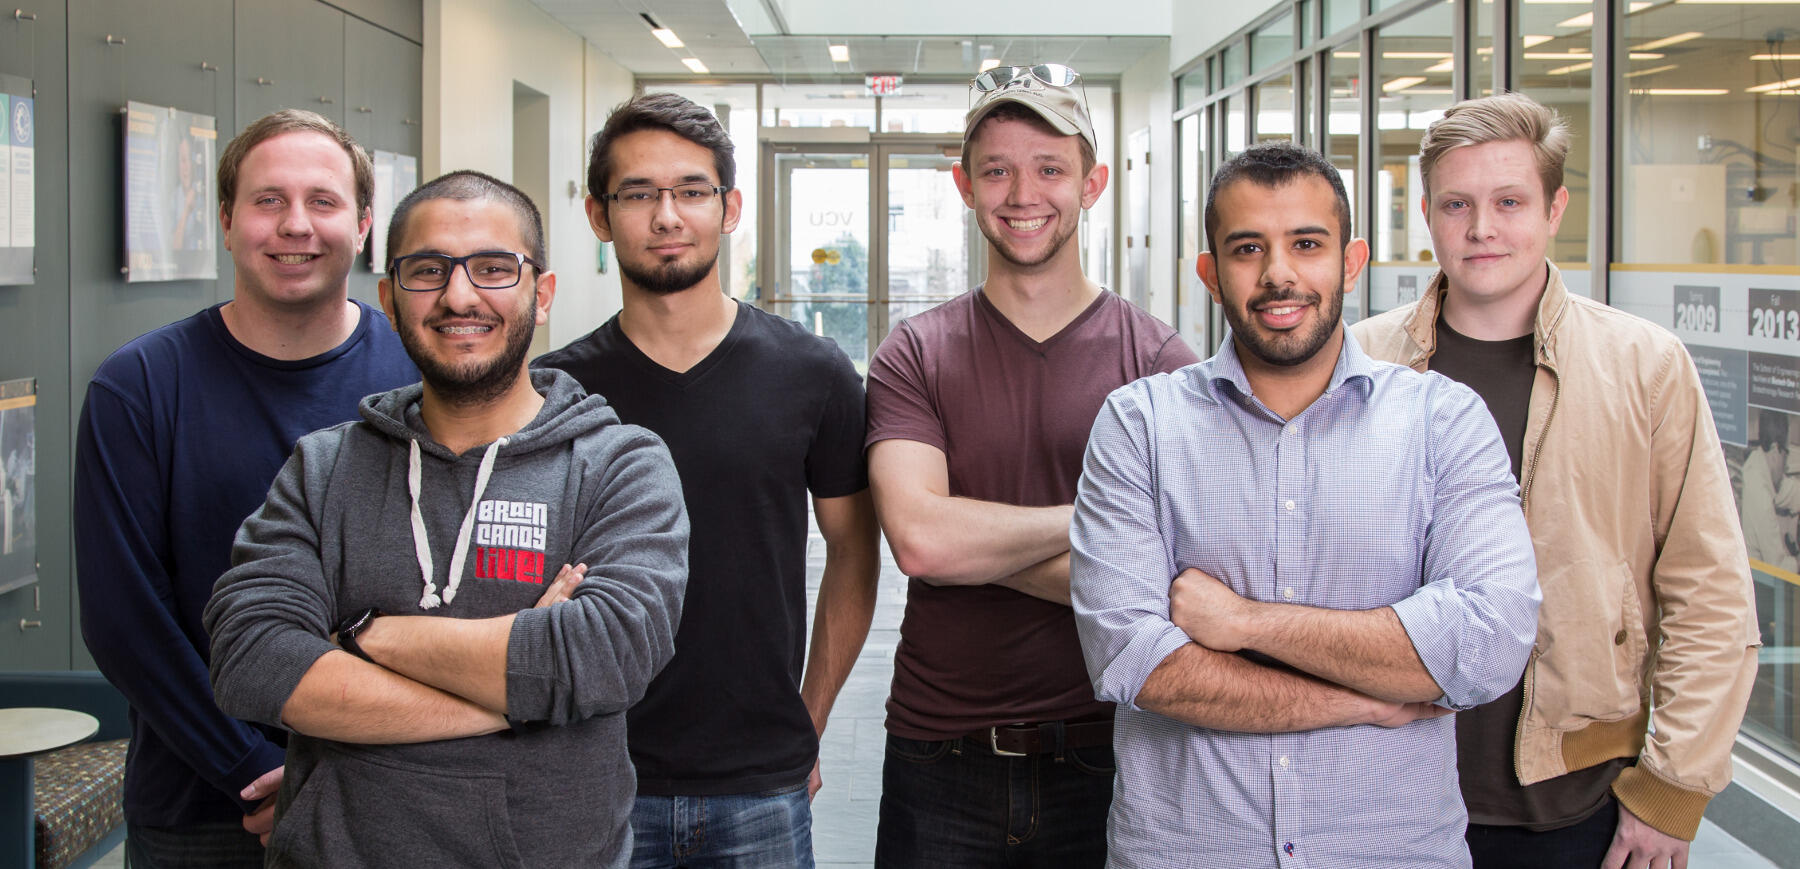 Wesley Bosman, Majid AlAshari, Jon Dyke, Marcus Massok, Ashraf Al Gumaei, James Walters and Justin Artis (not pictured) are one of 11 interdisciplinary teams of engineering and entrepreneurship students collaborating on capstone projects this year. They are designing — and commercializing — a wearable cardiac arrest detection device.